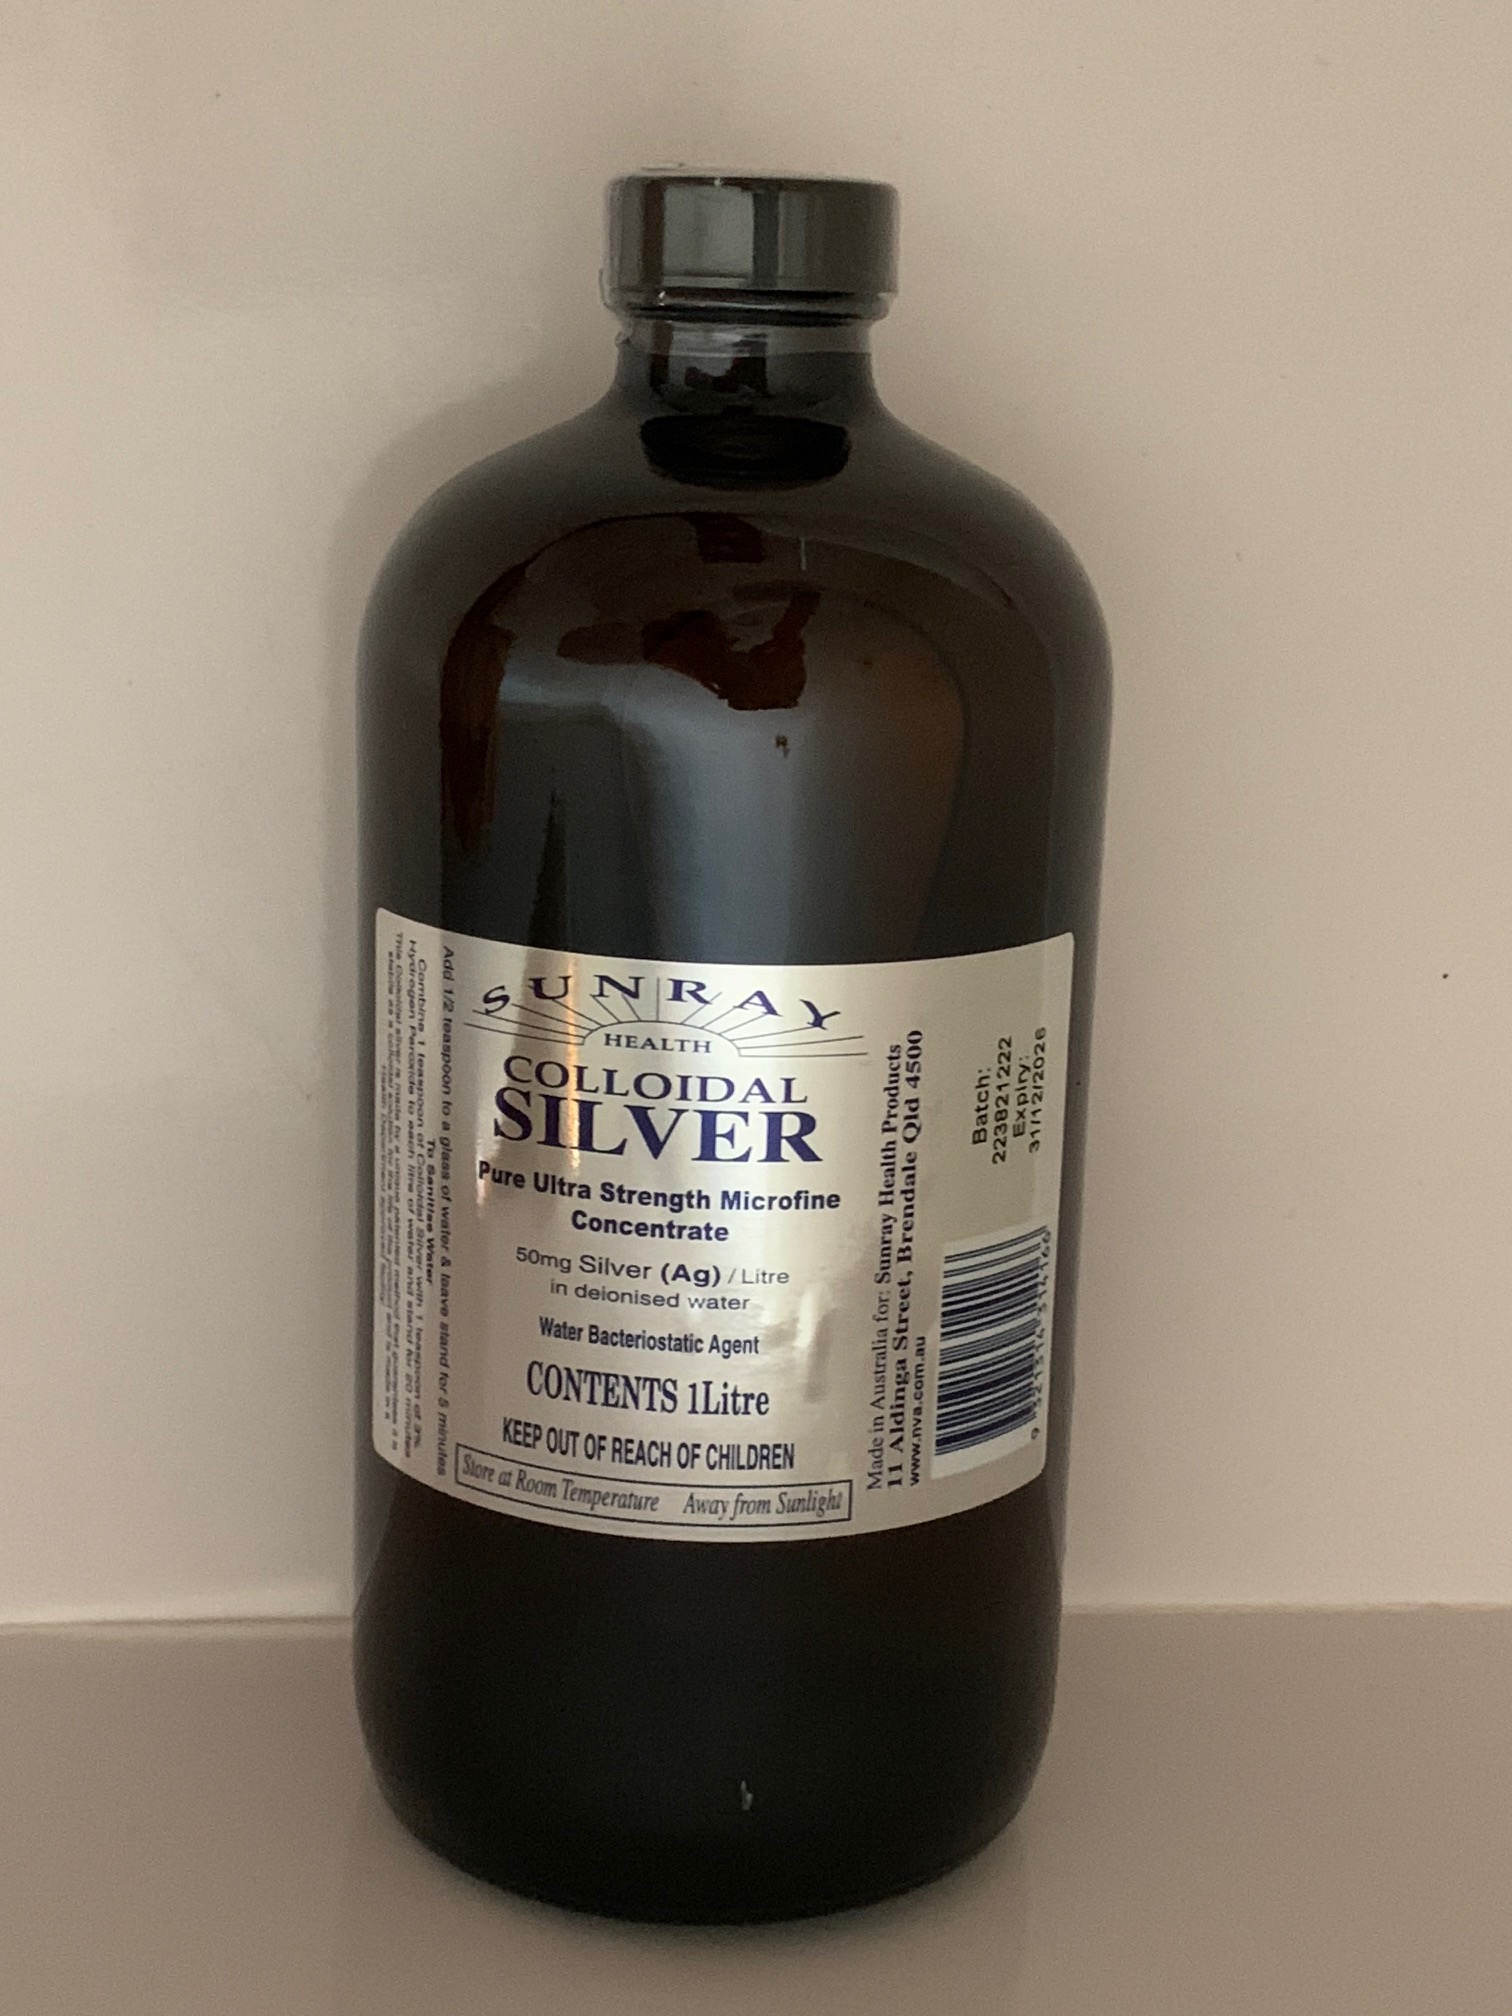 Pure Microfine Colloidal Silver. 50ppmSilver (Ag)/Lt. In de-ionised water. 1-litre. - Click Image to Close